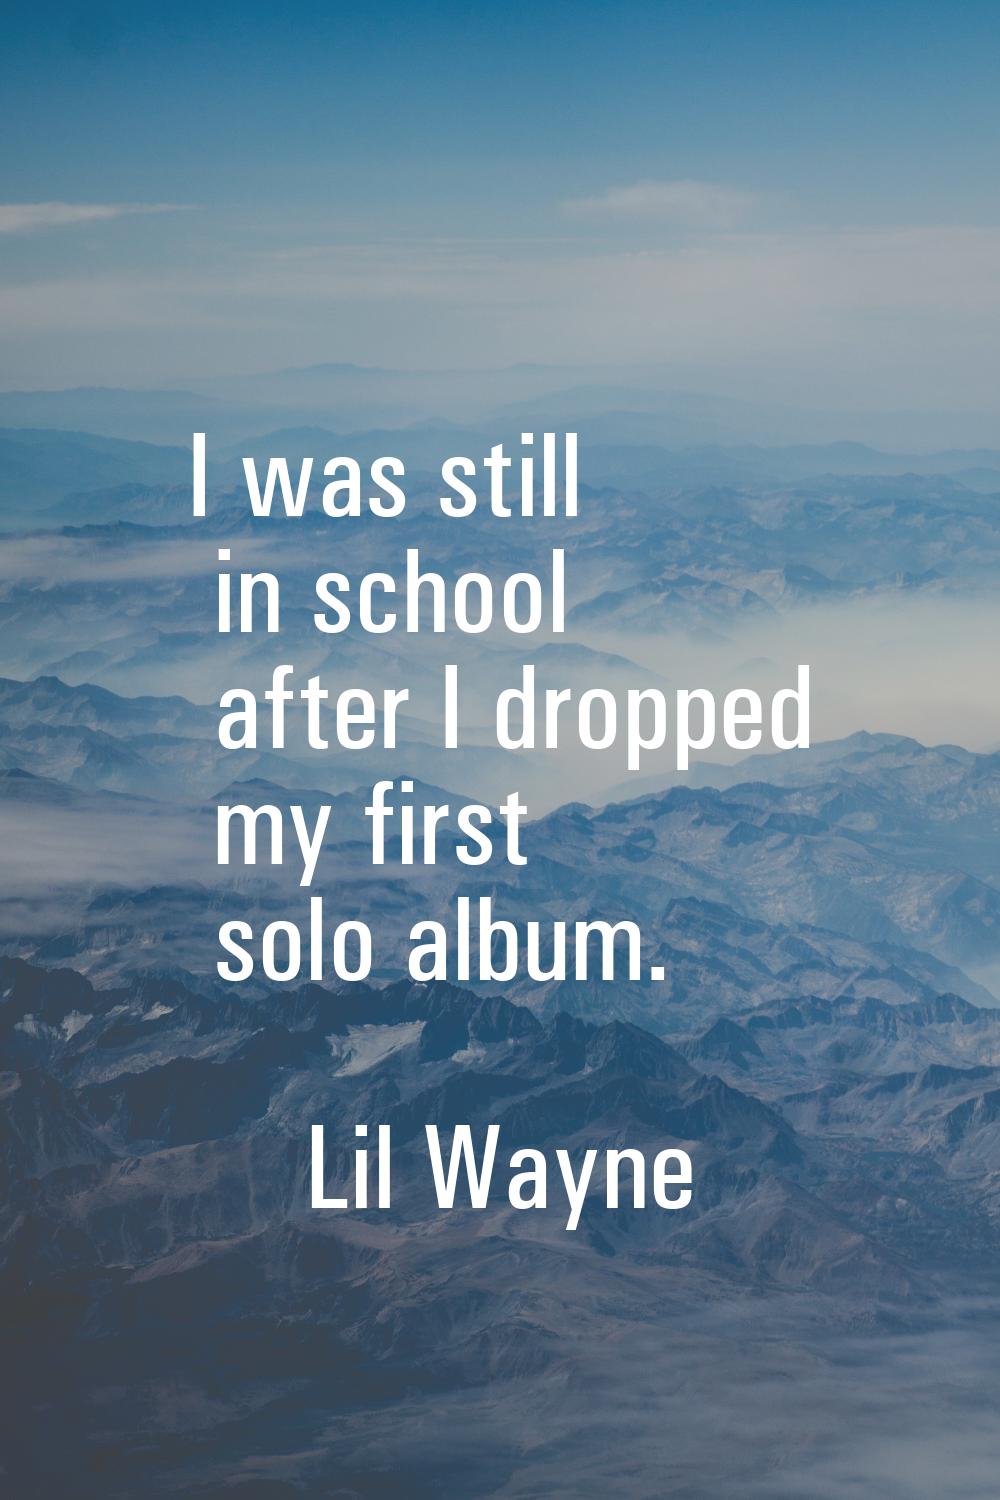 I was still in school after I dropped my first solo album.